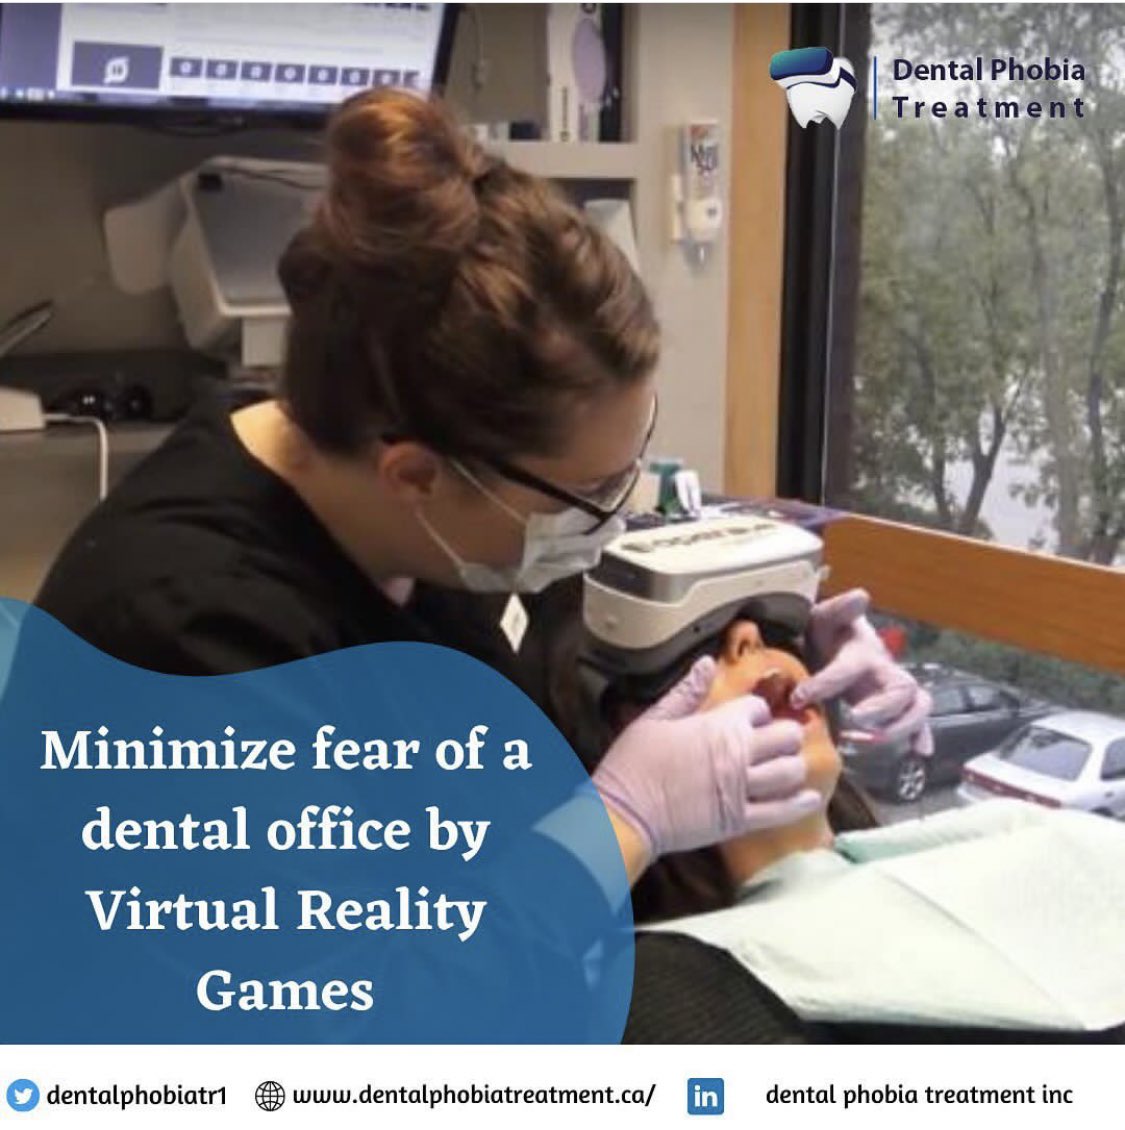 Those with a mild case of dental phobia can minimize fear of a dental office and improve their dental health. Patients at dental offices can wear a VR headset and enjoy our 3D animated program while allowing a dentist to perform their tasks.
#dentalphobia #phobiatreatment